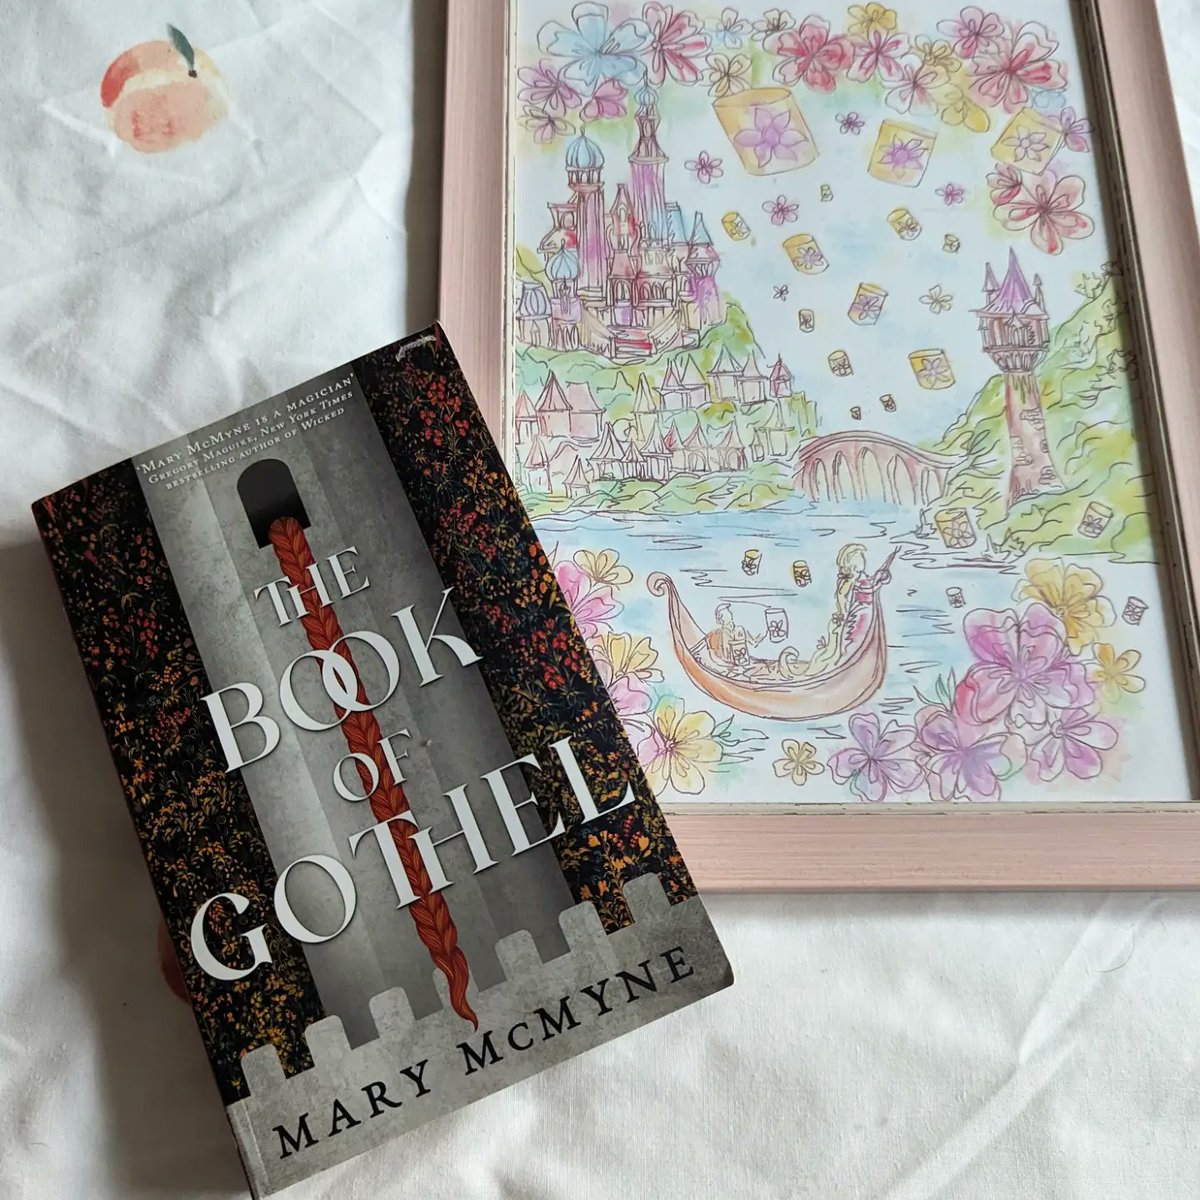 New post: Review of The Book of Gothel by @MaryMcMyne I absolutely loved this read, definitely one to pick up if you love folklore tales. Full review: instagram.com/p/C4BUM3ILLSt/… #BookReview #BookTwitter